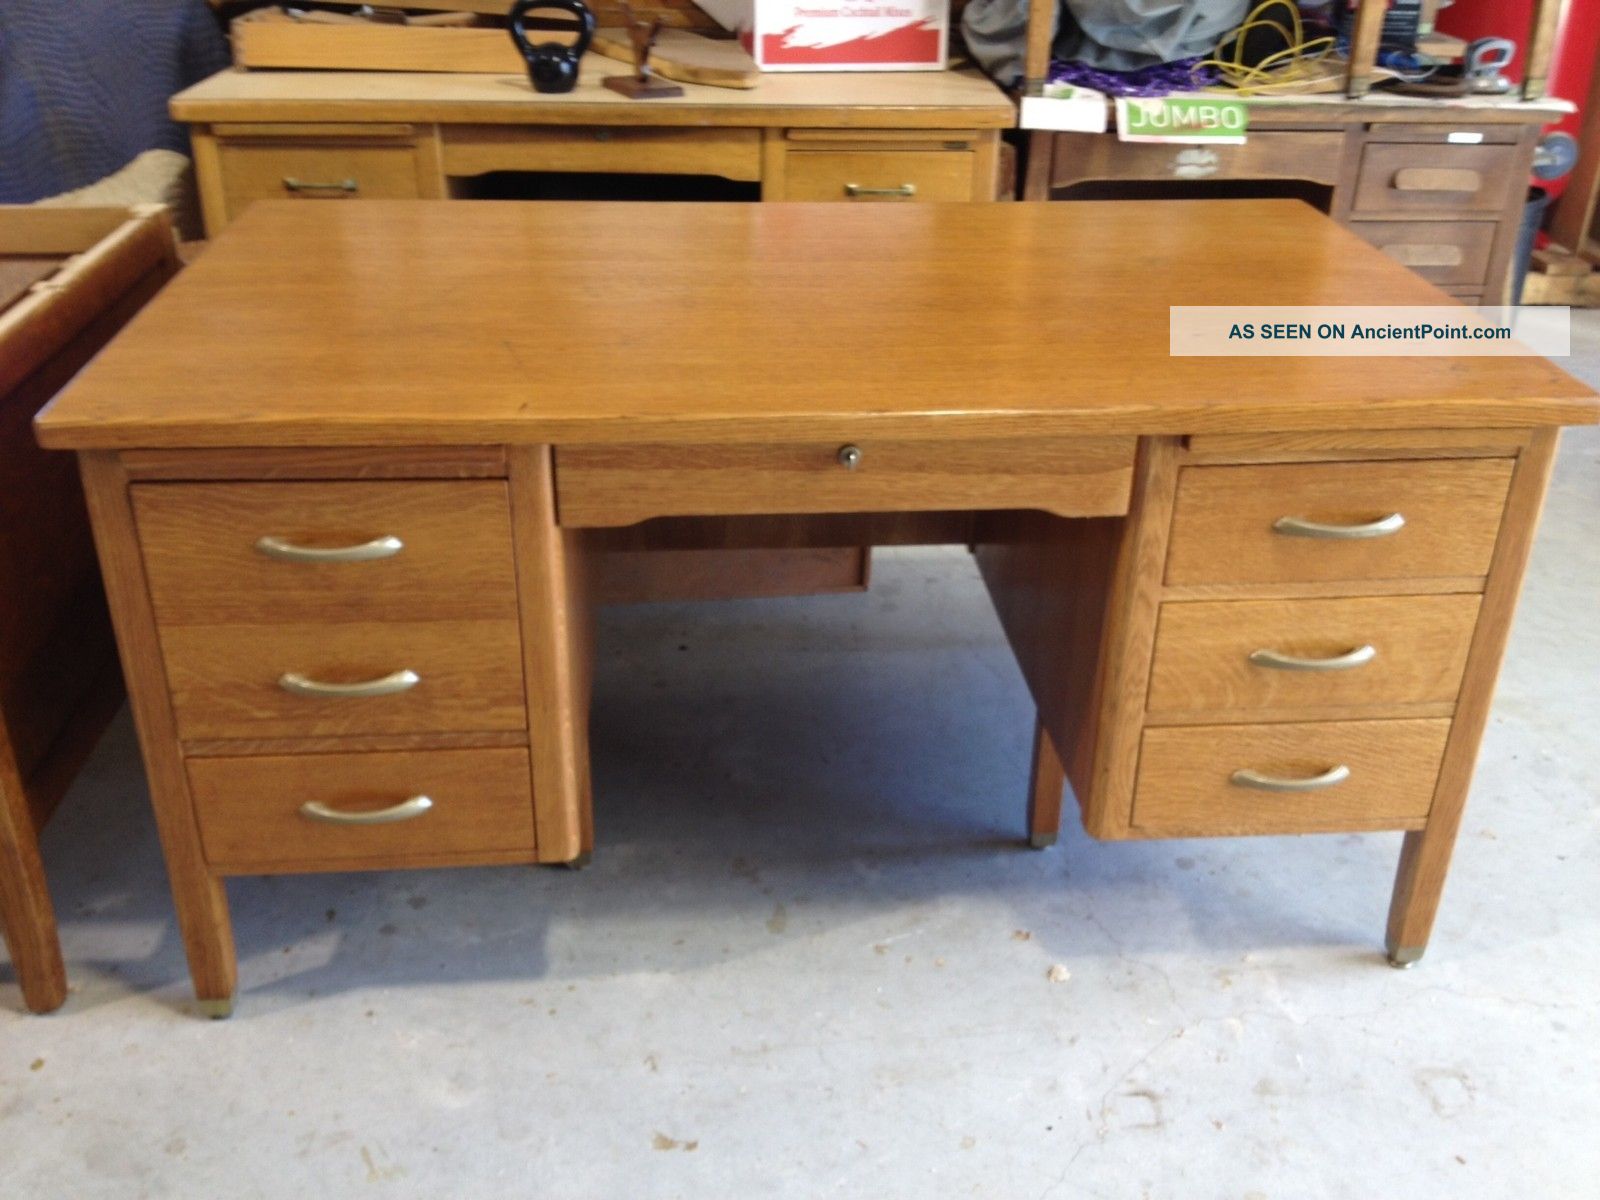 1961 Antique Riff Cut Oak Wood Desk From The Univ Of Texas By Leopold Company 1900-1950 photo